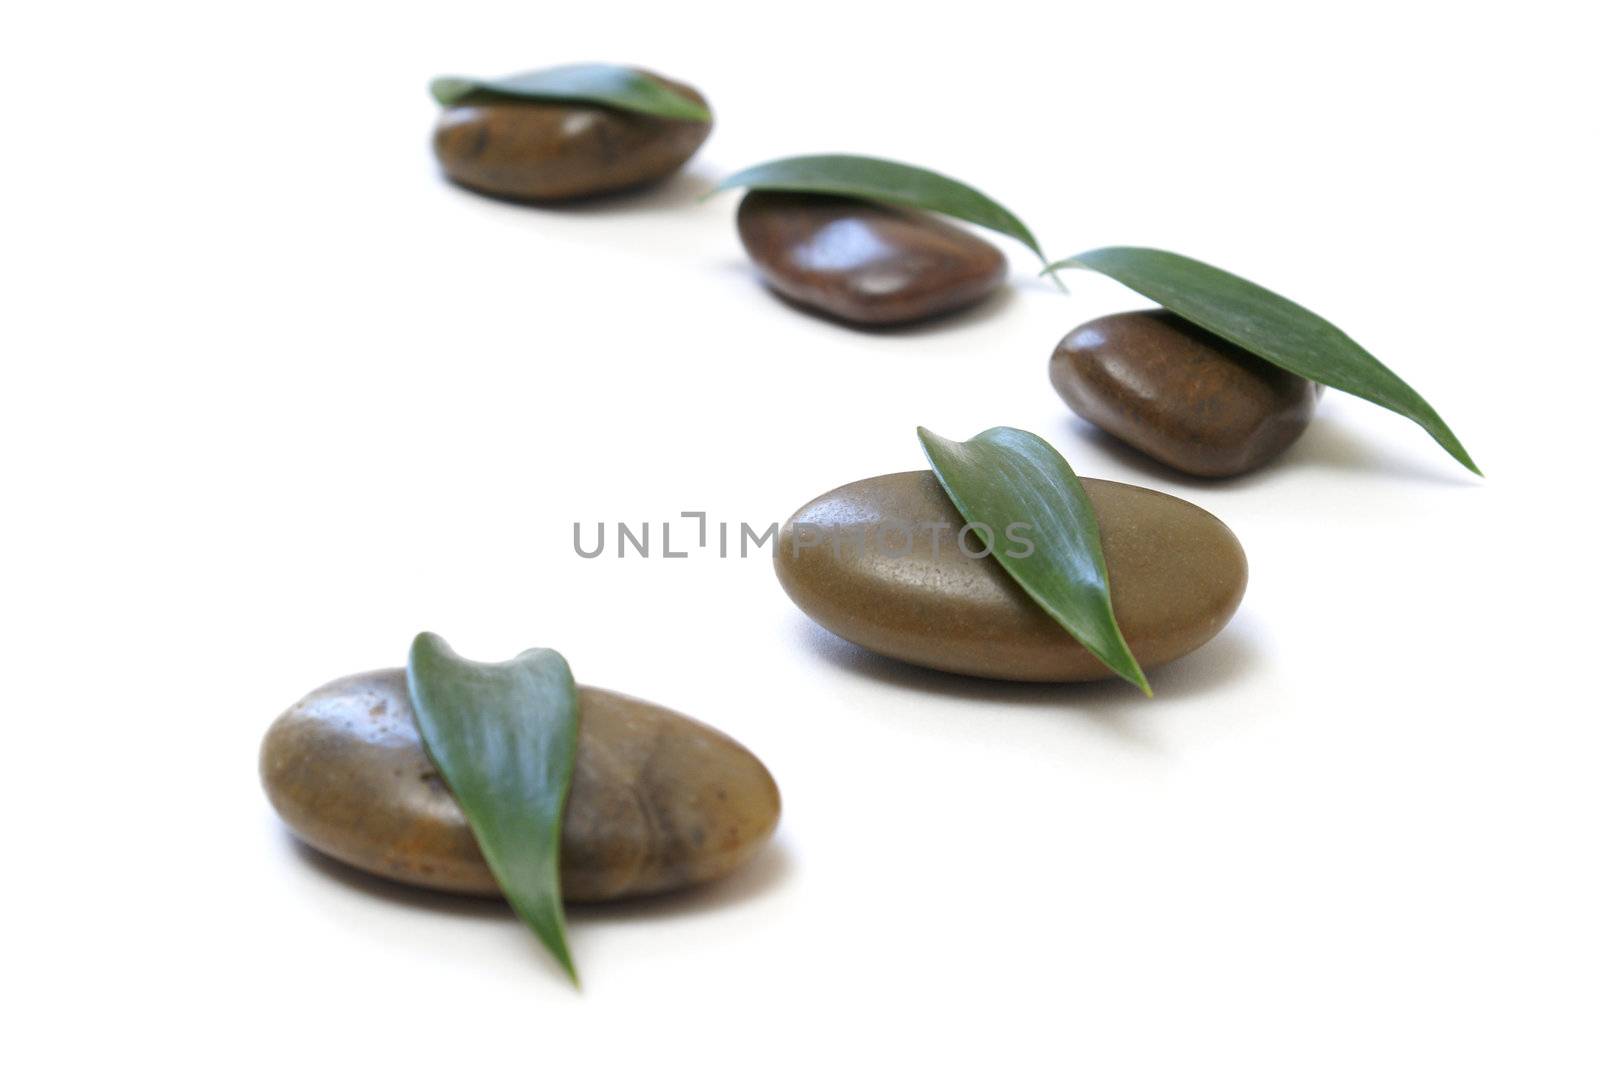 Many smooth stones with leaves on them in a peaceful arrangement.